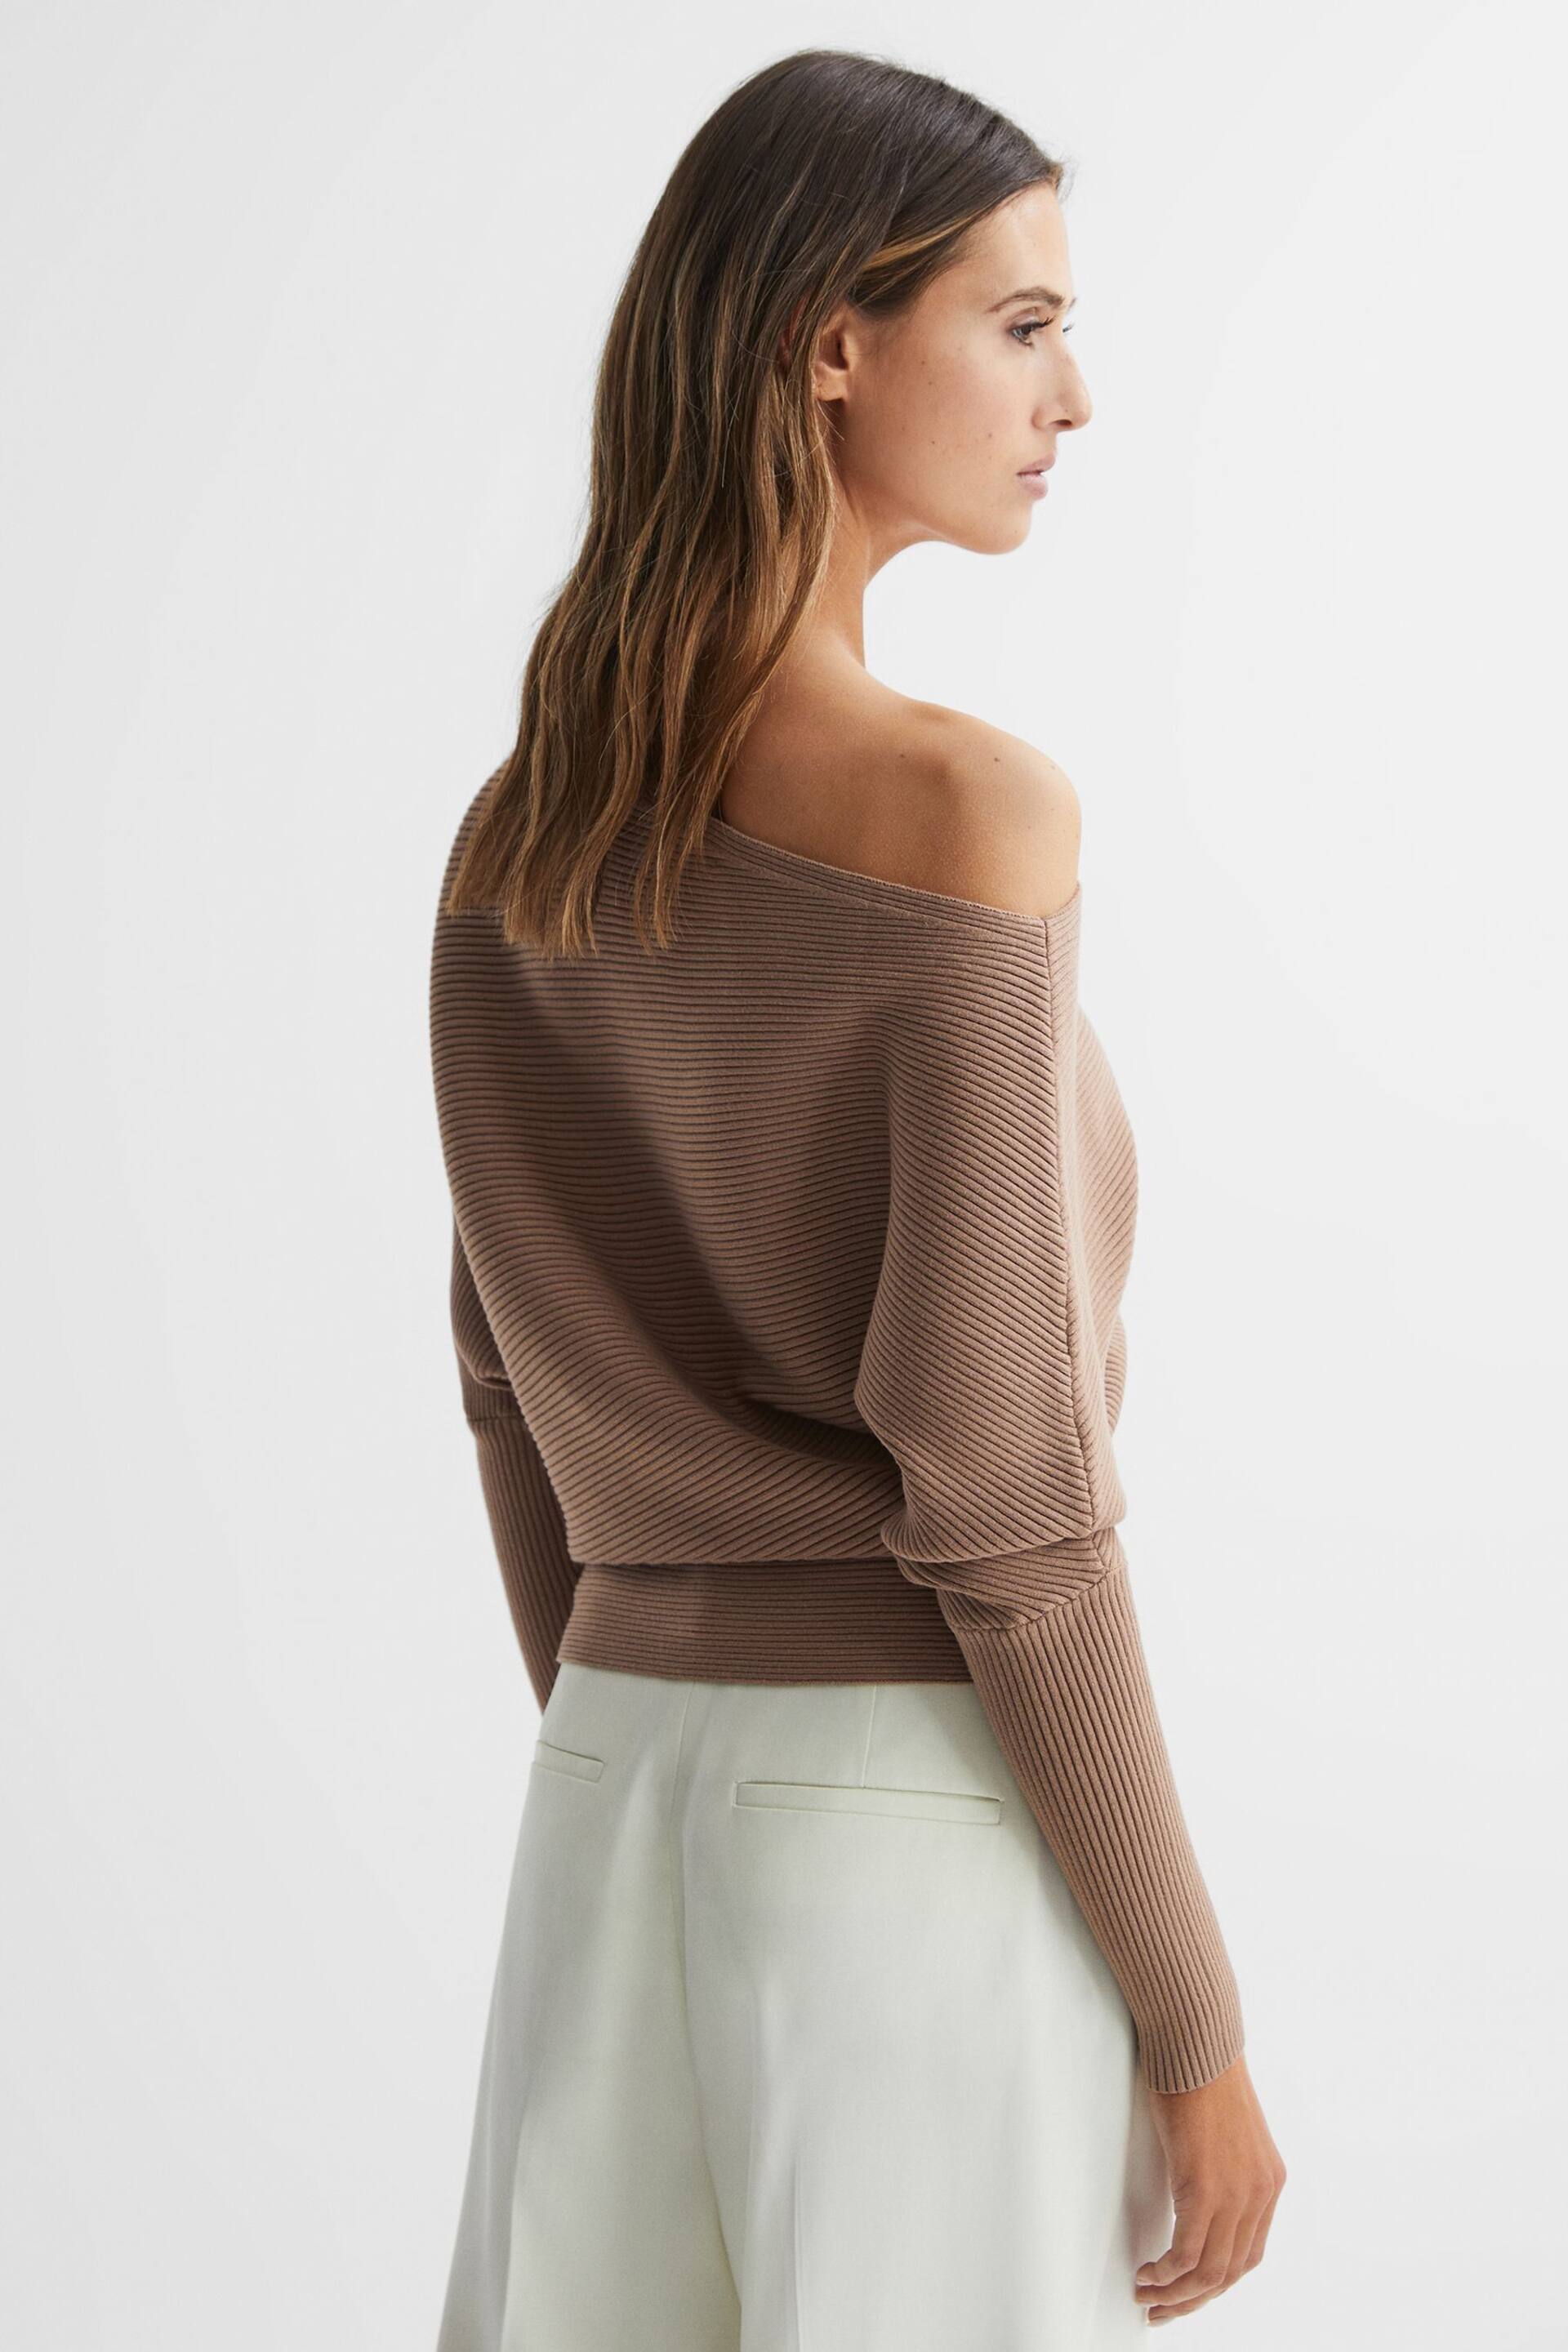 Reiss Camel Lorna Asymmetric Drape Knitted Top - Image 4 of 4